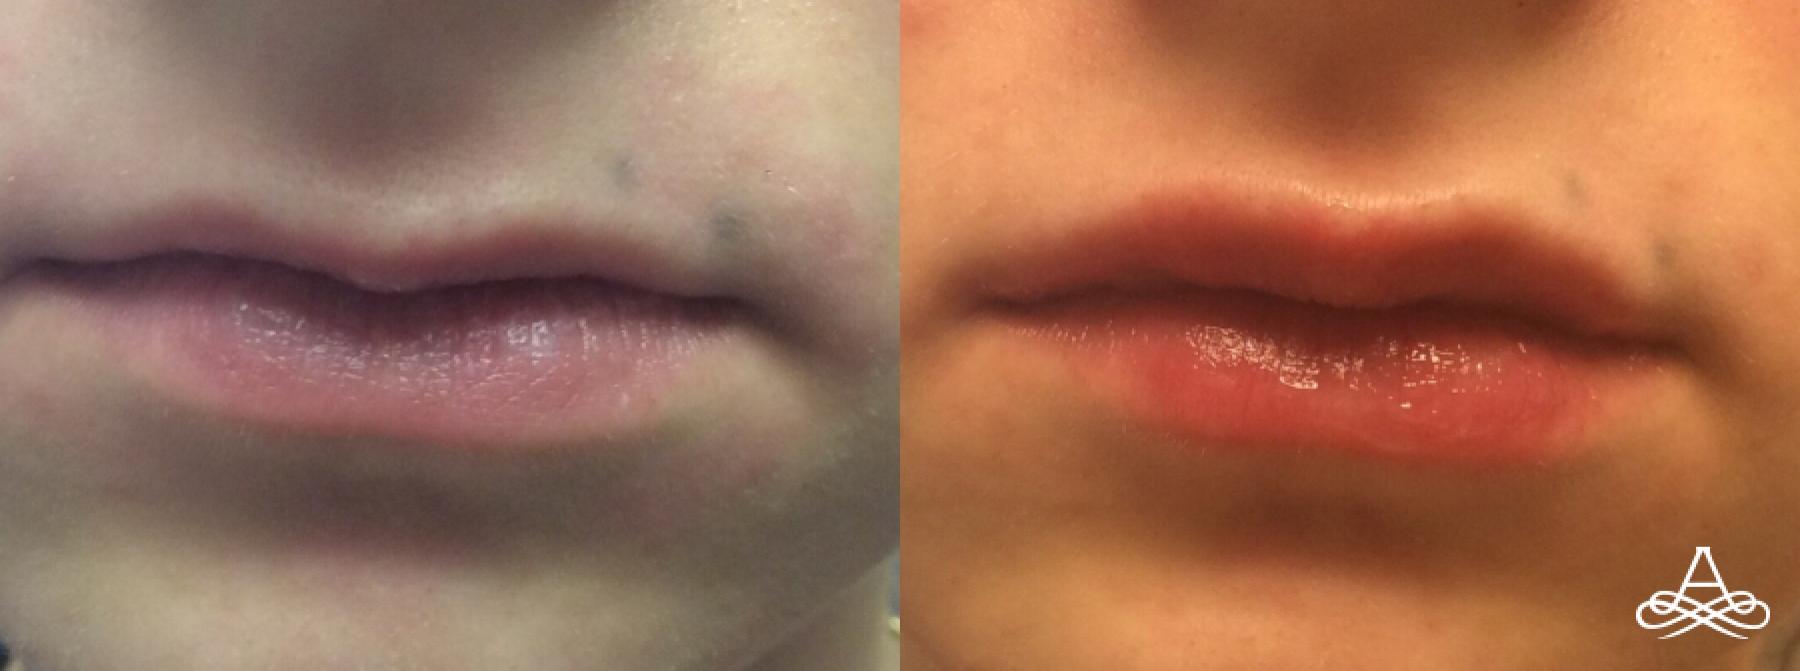 Lip Filler: Patient 8 - Before and After  